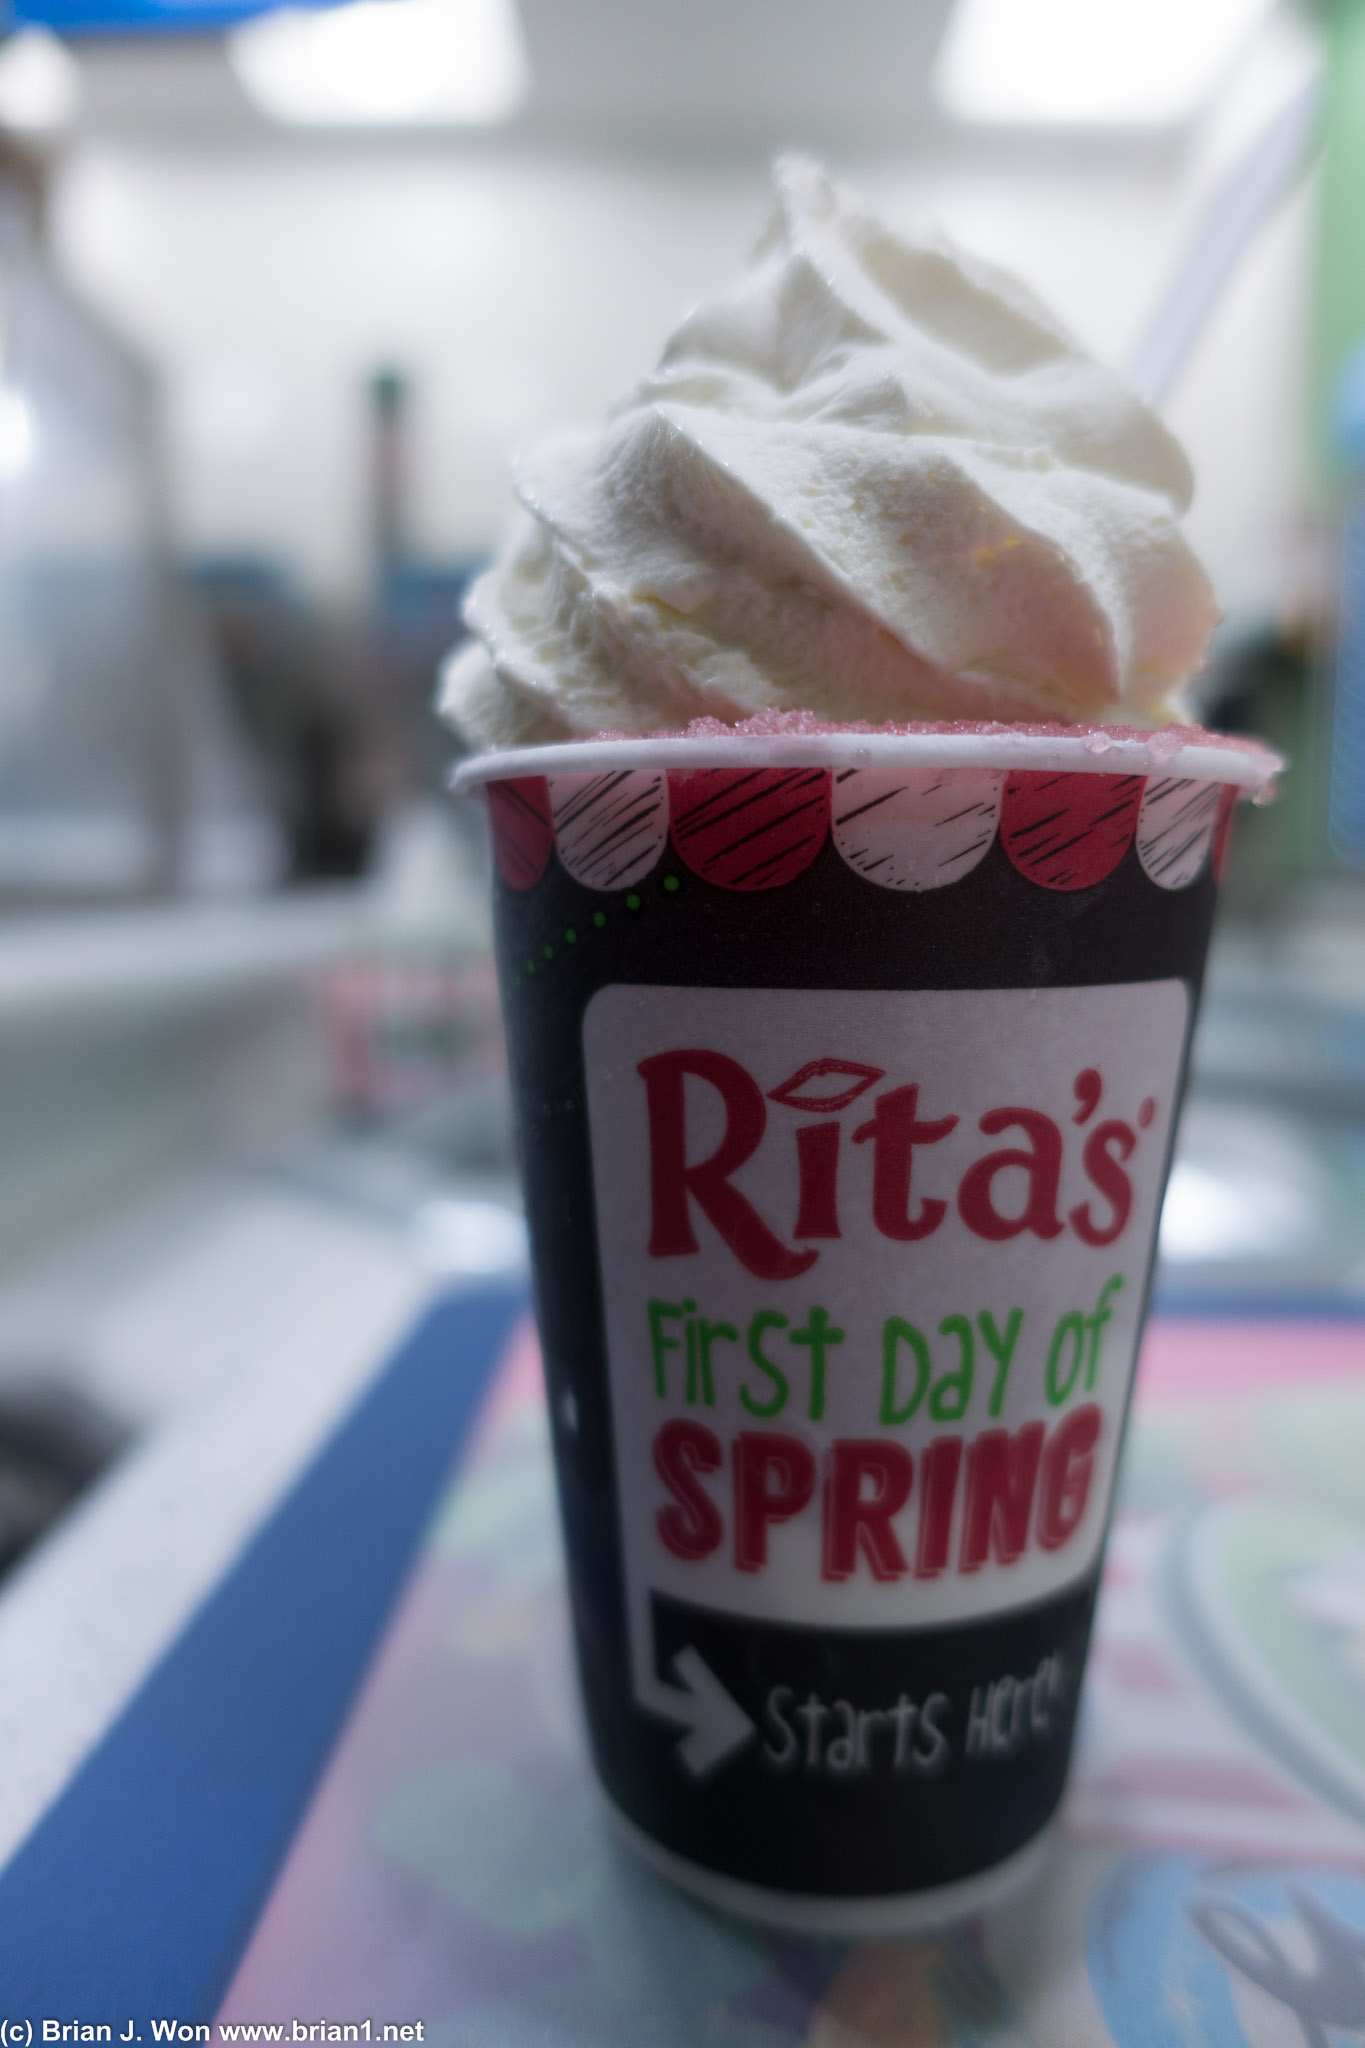 Free Italian ice at Rita's for first day of spring.